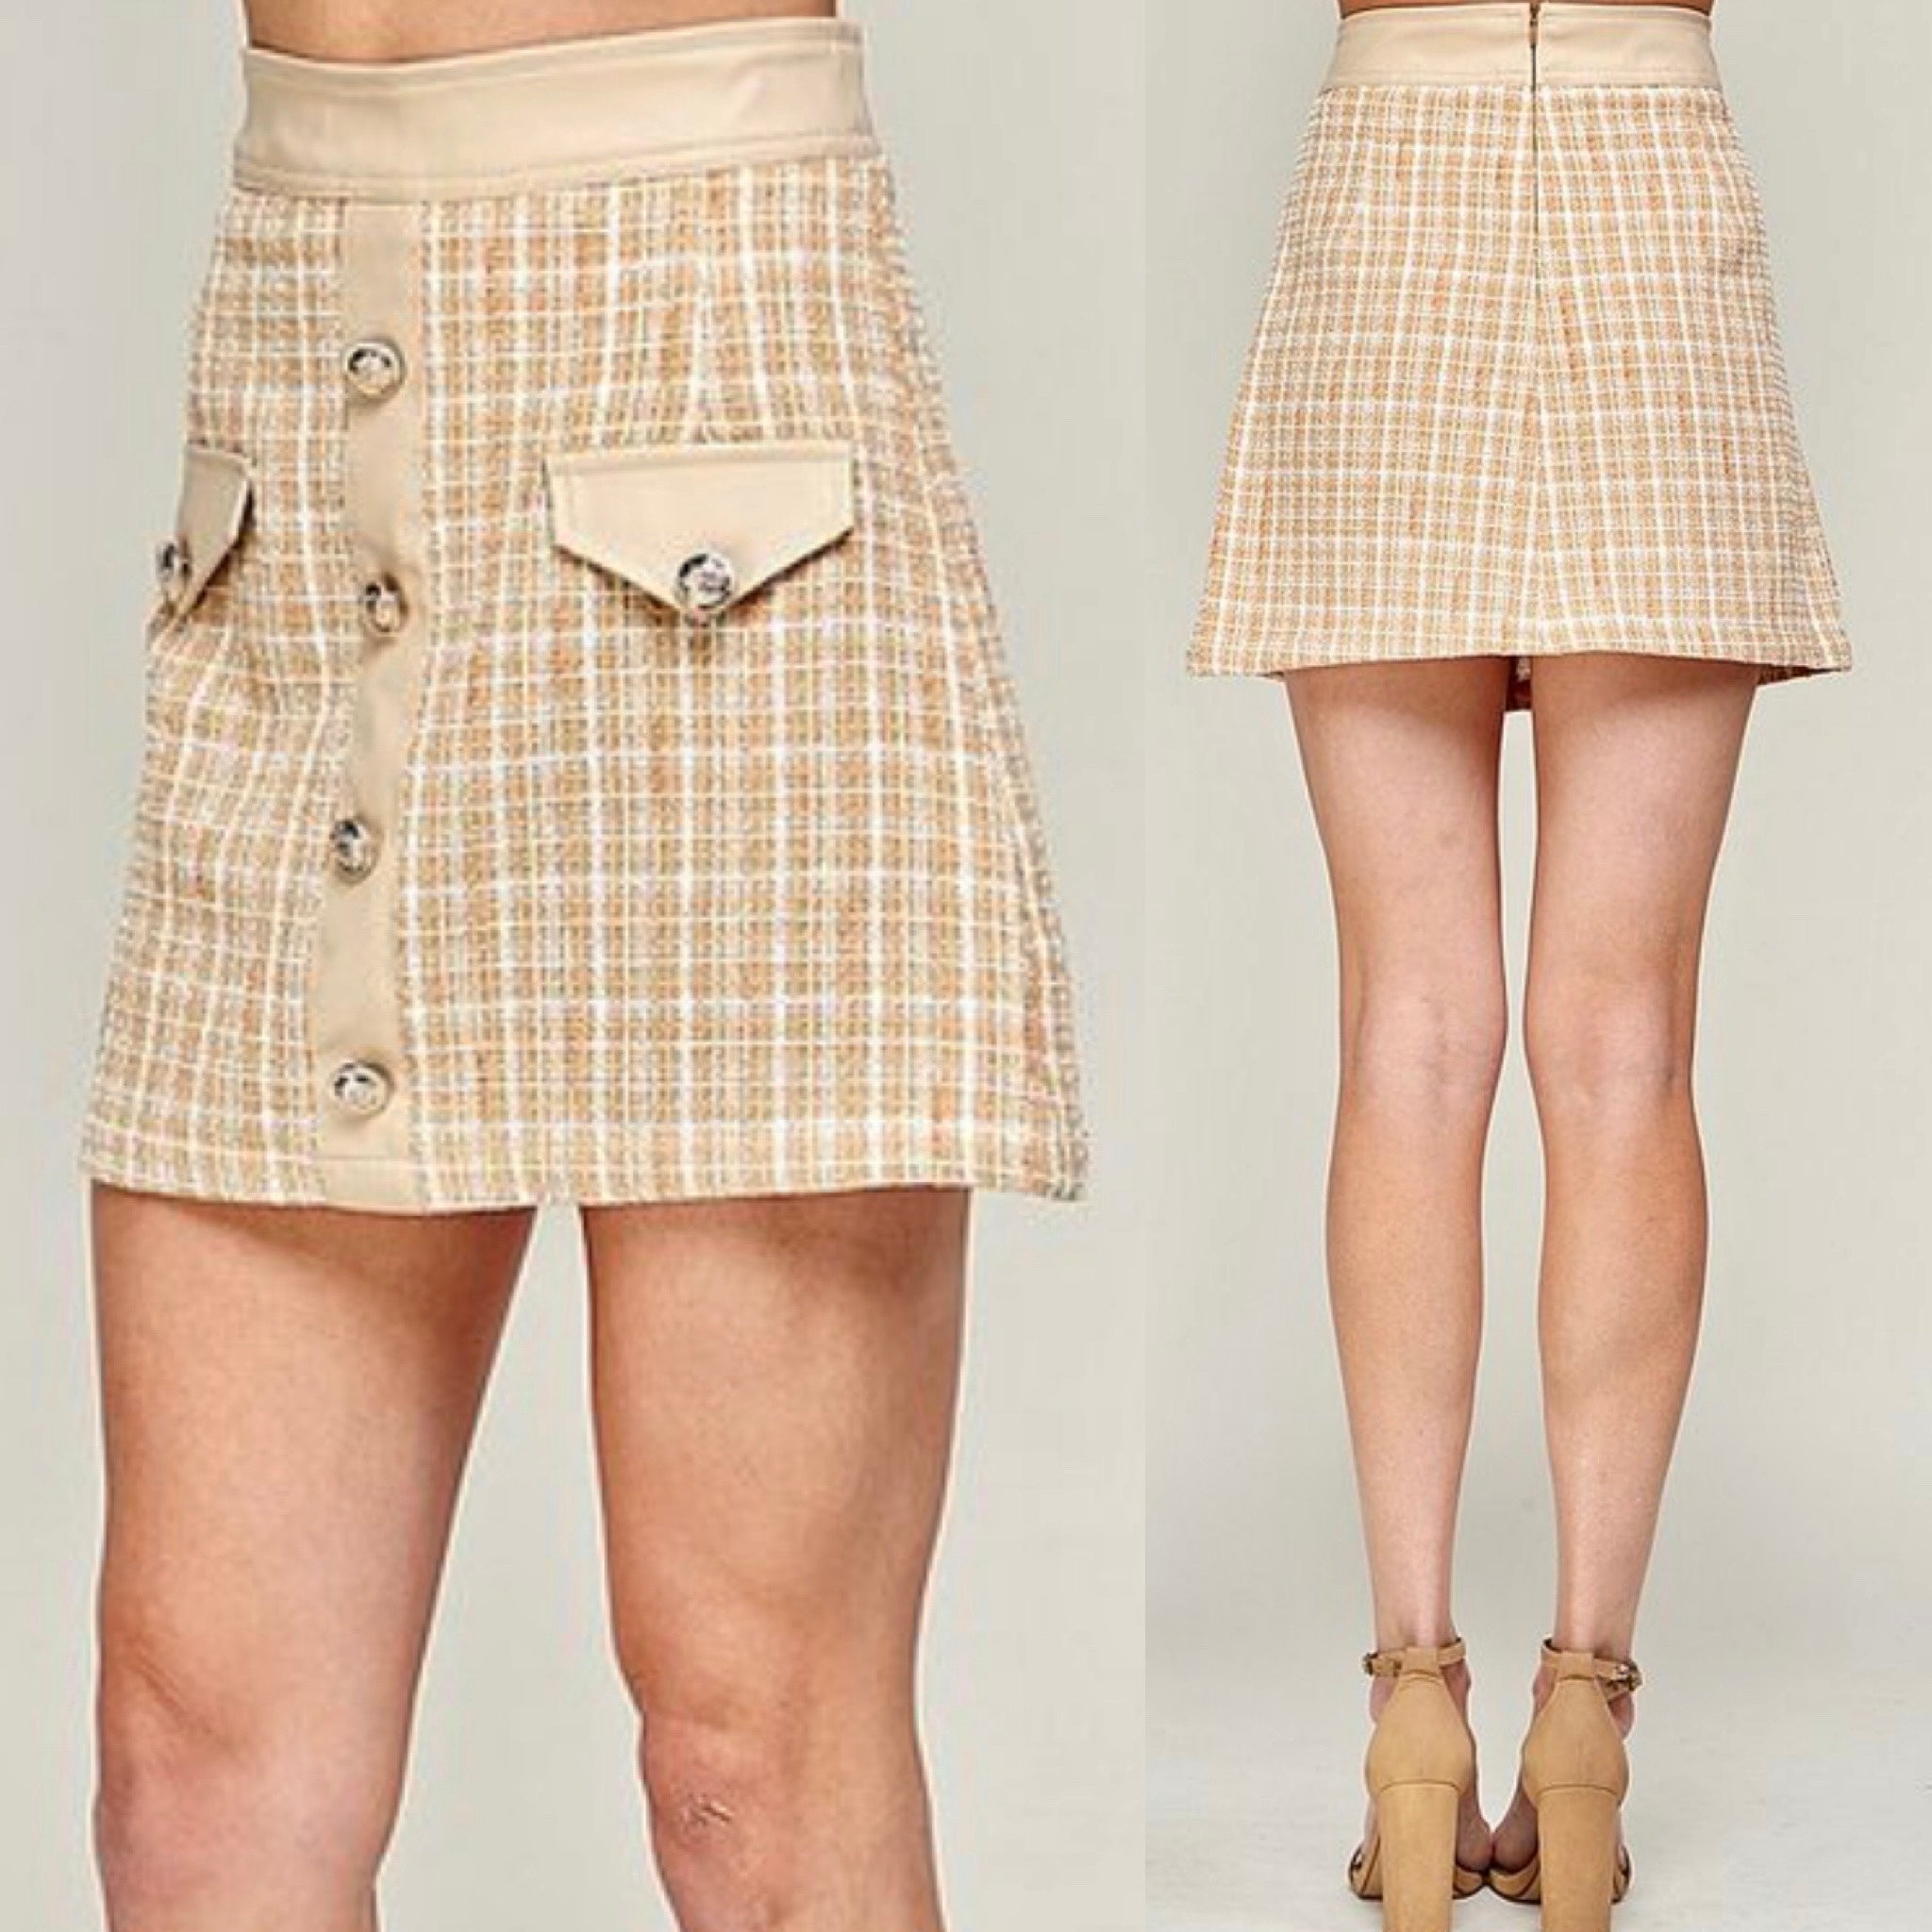 The “Preppy Babe” Tweed Skirt